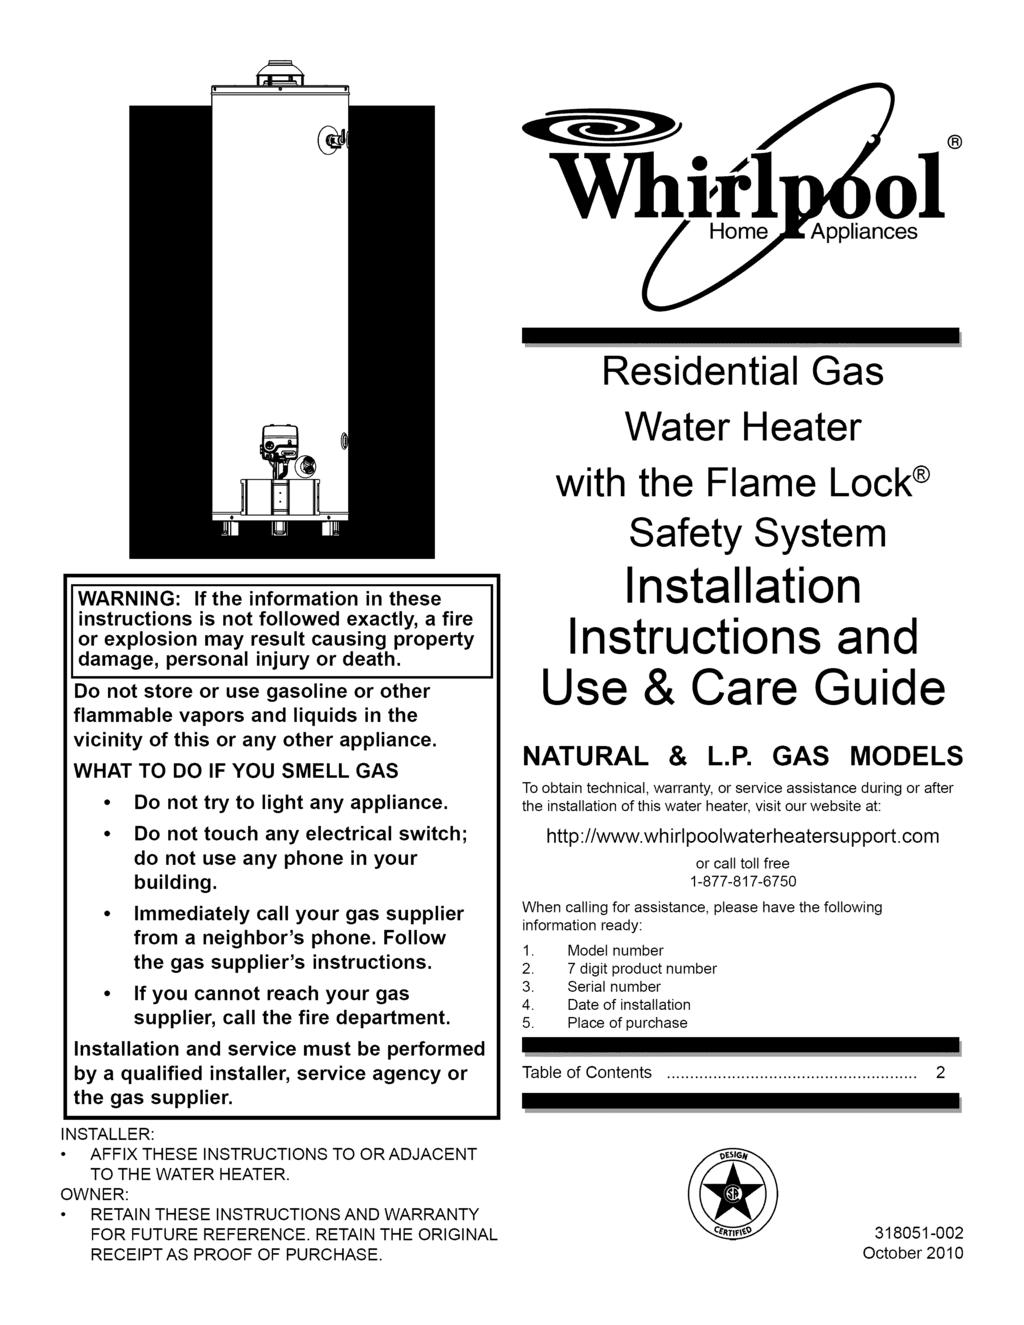 o] Home Appliances WARNING: If the information in these instructions is not followed exactly, a fire or explosion may result causing property damage, personal injury or death.